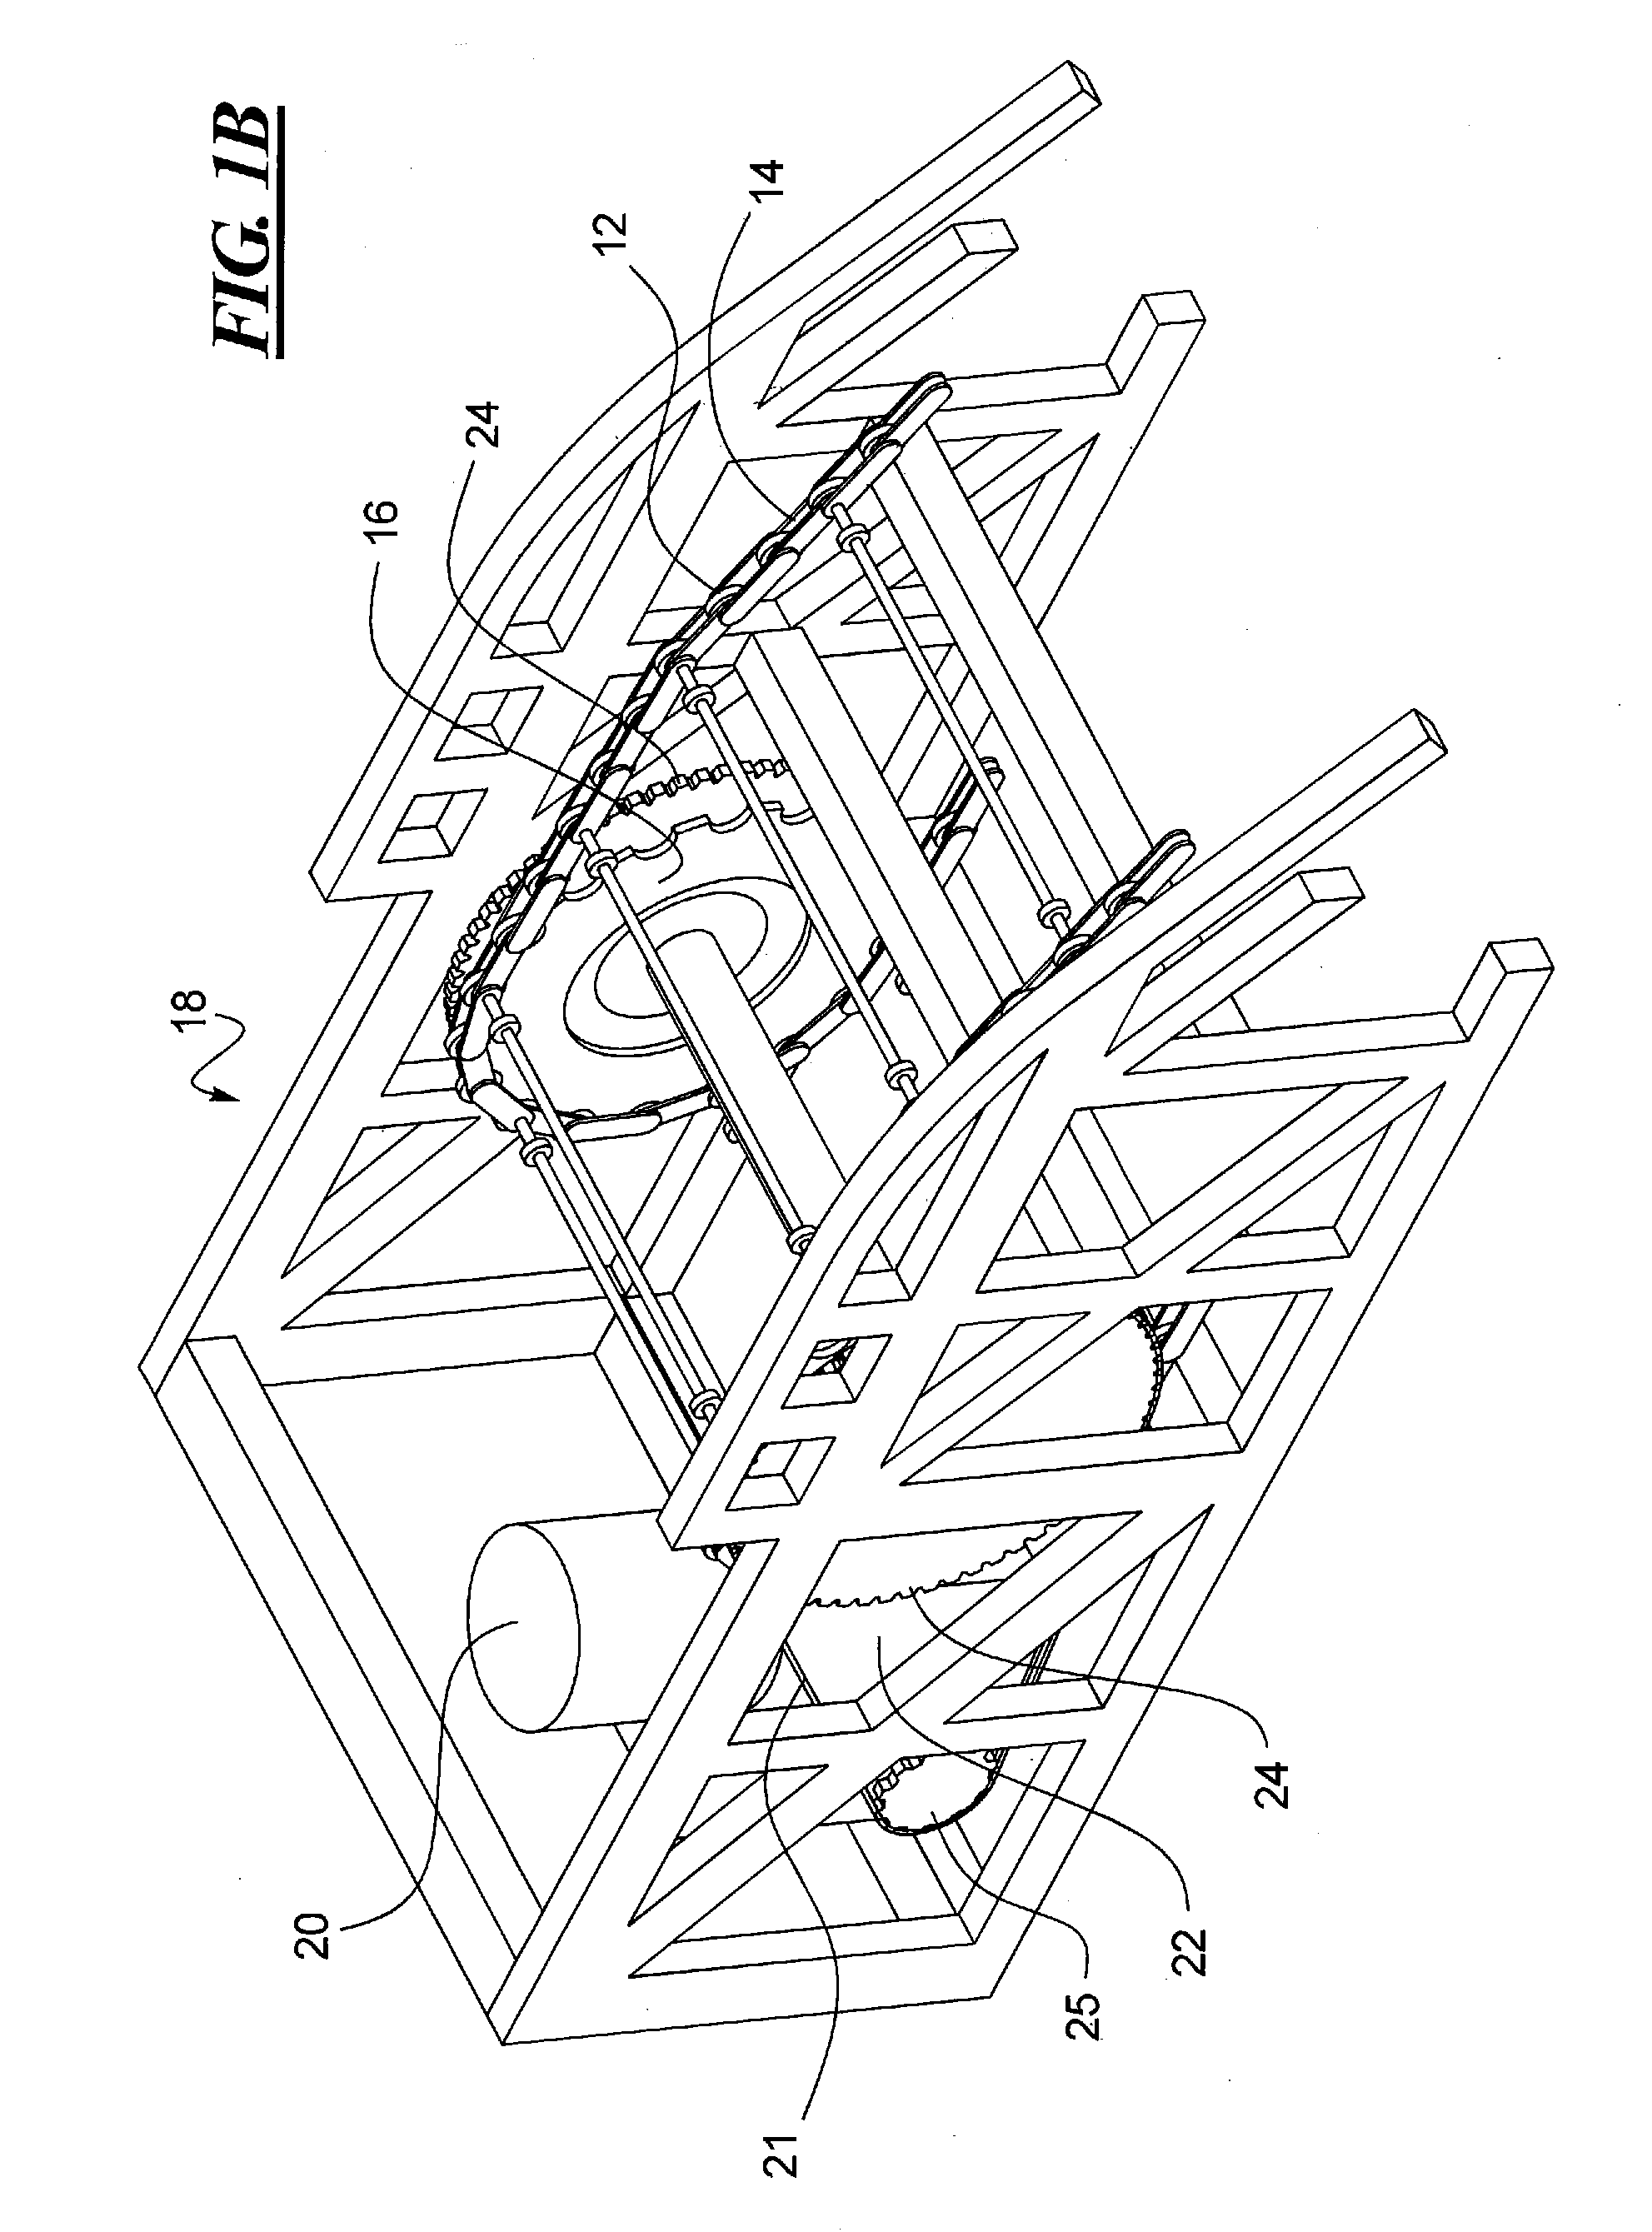 Polygon Compensation Coupling for Chain and Sprocket Driven Systems